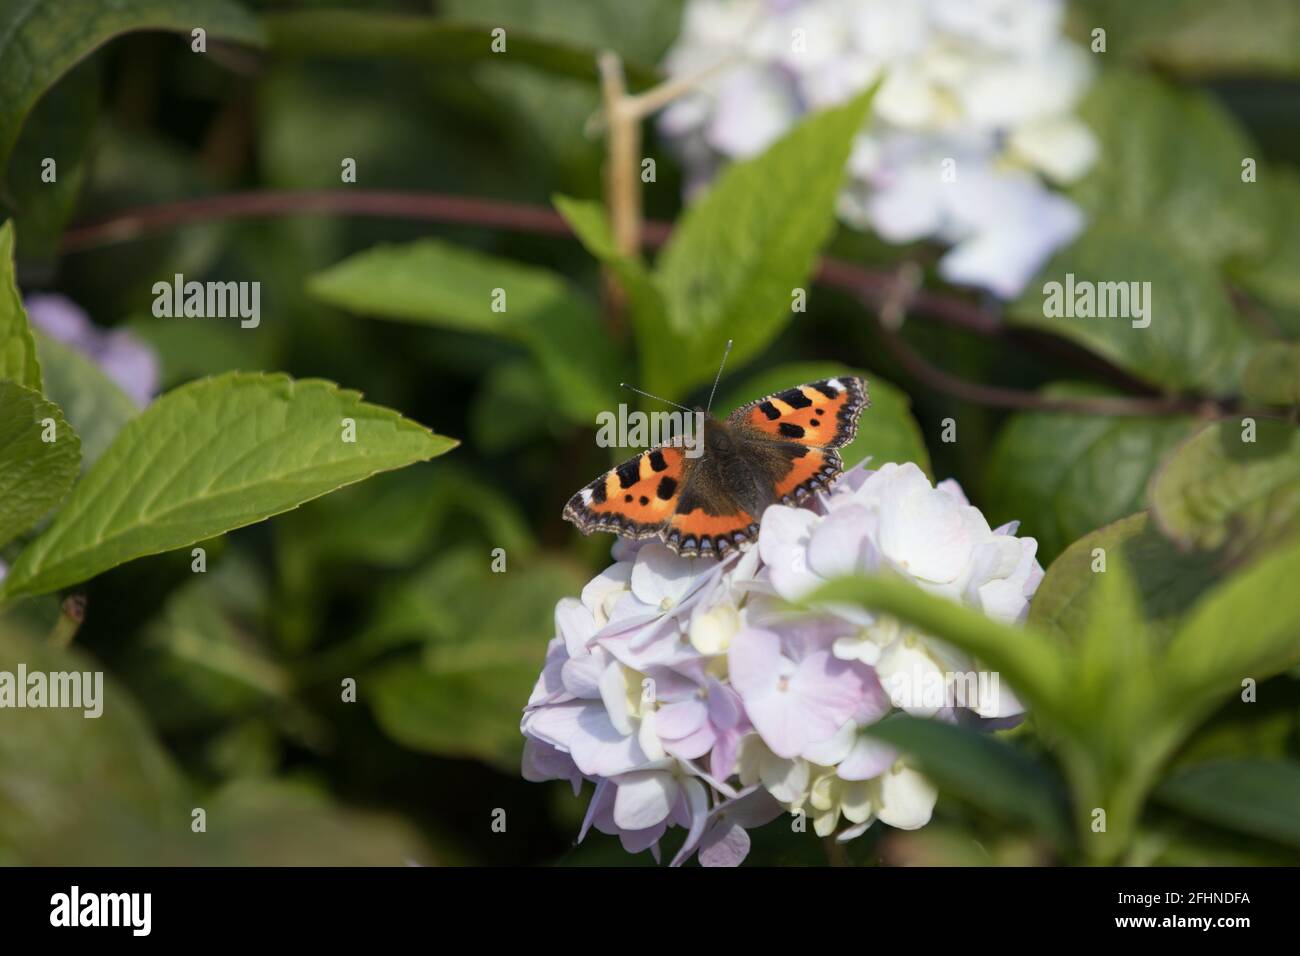 Large tortoiseshell butterfly sitting on a white flower. British insect in a UK garden in summer Stock Photo